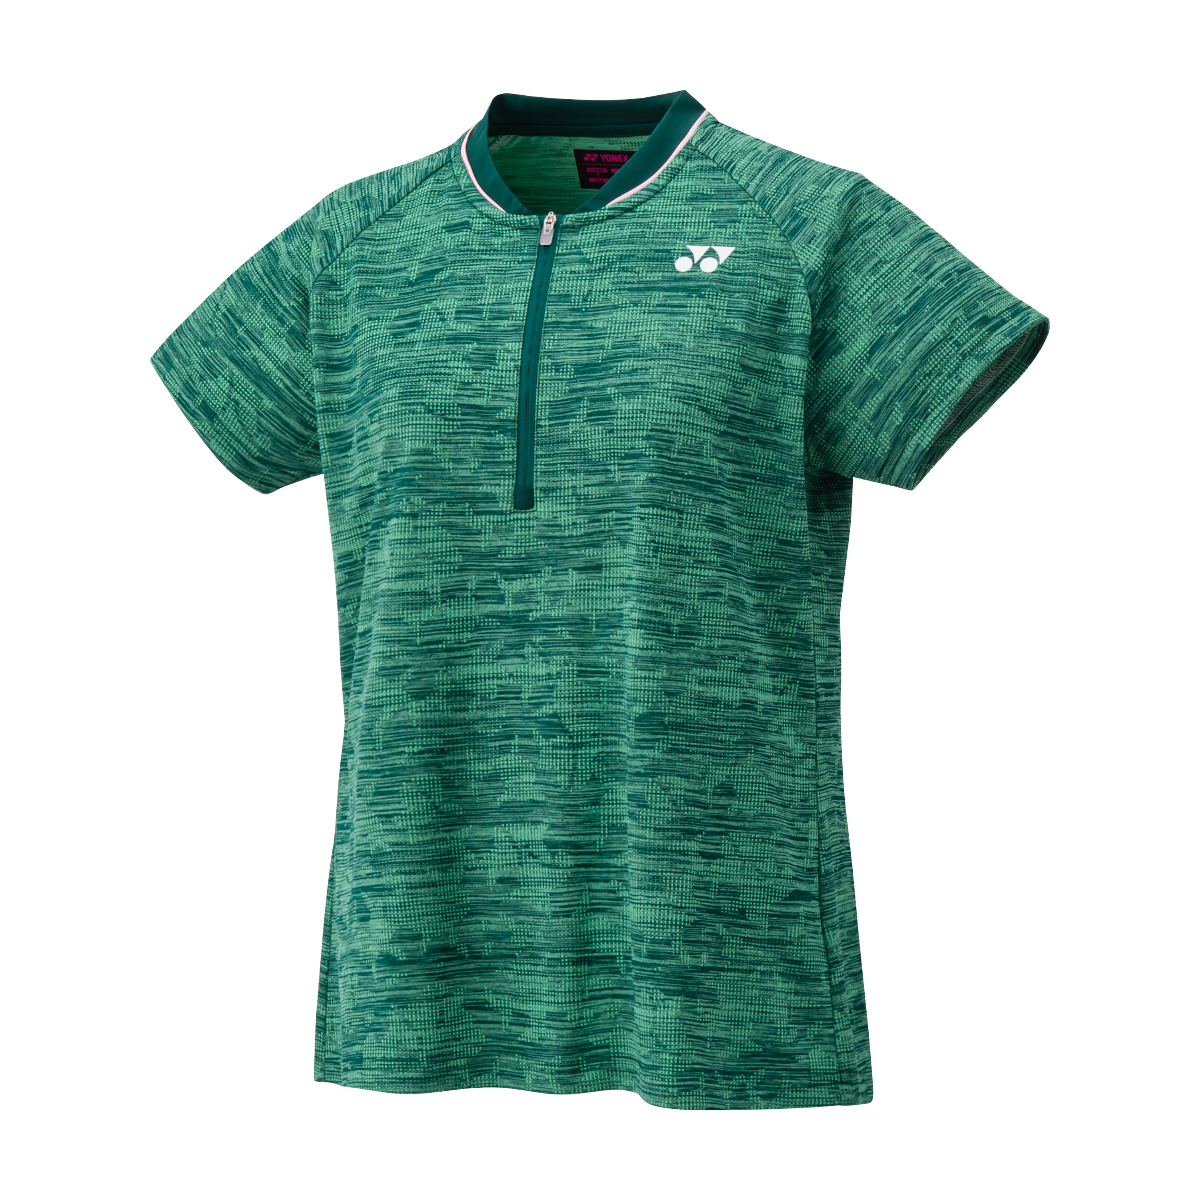 LADIES POLO 20652 "FRENCH OPEN" Teal Green